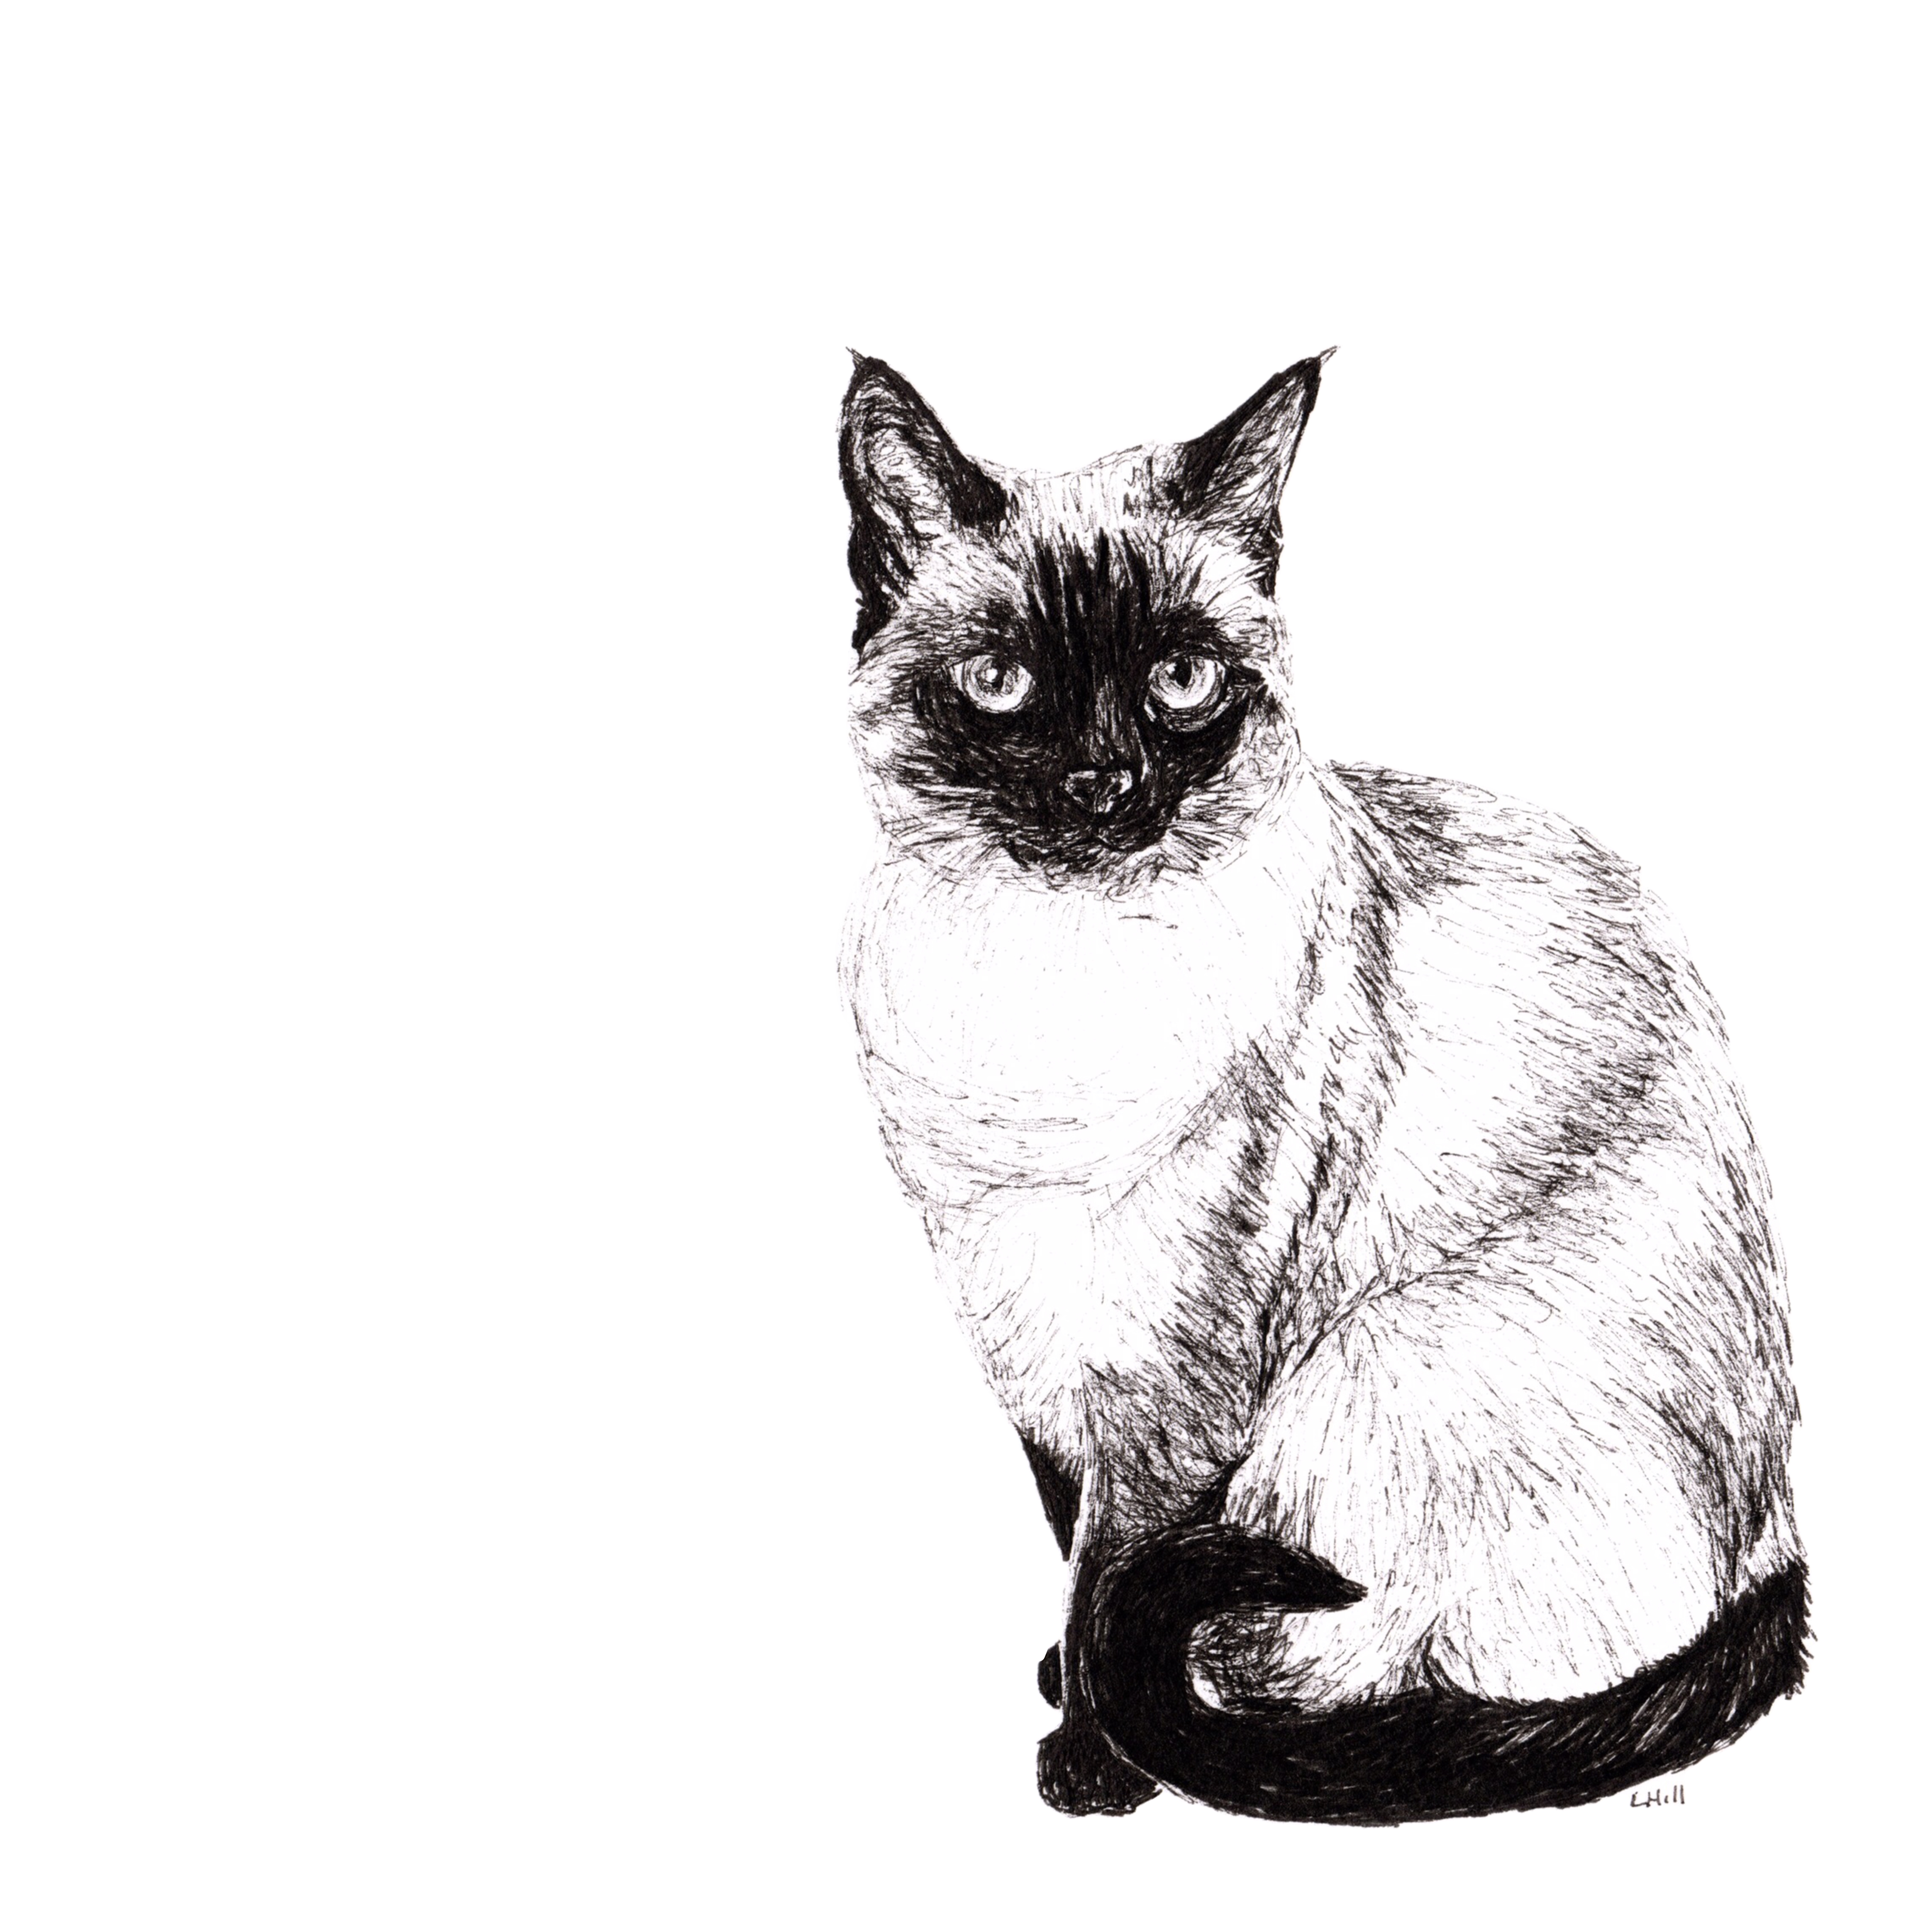 Siamese pen and ink illustration by Louisa Hill